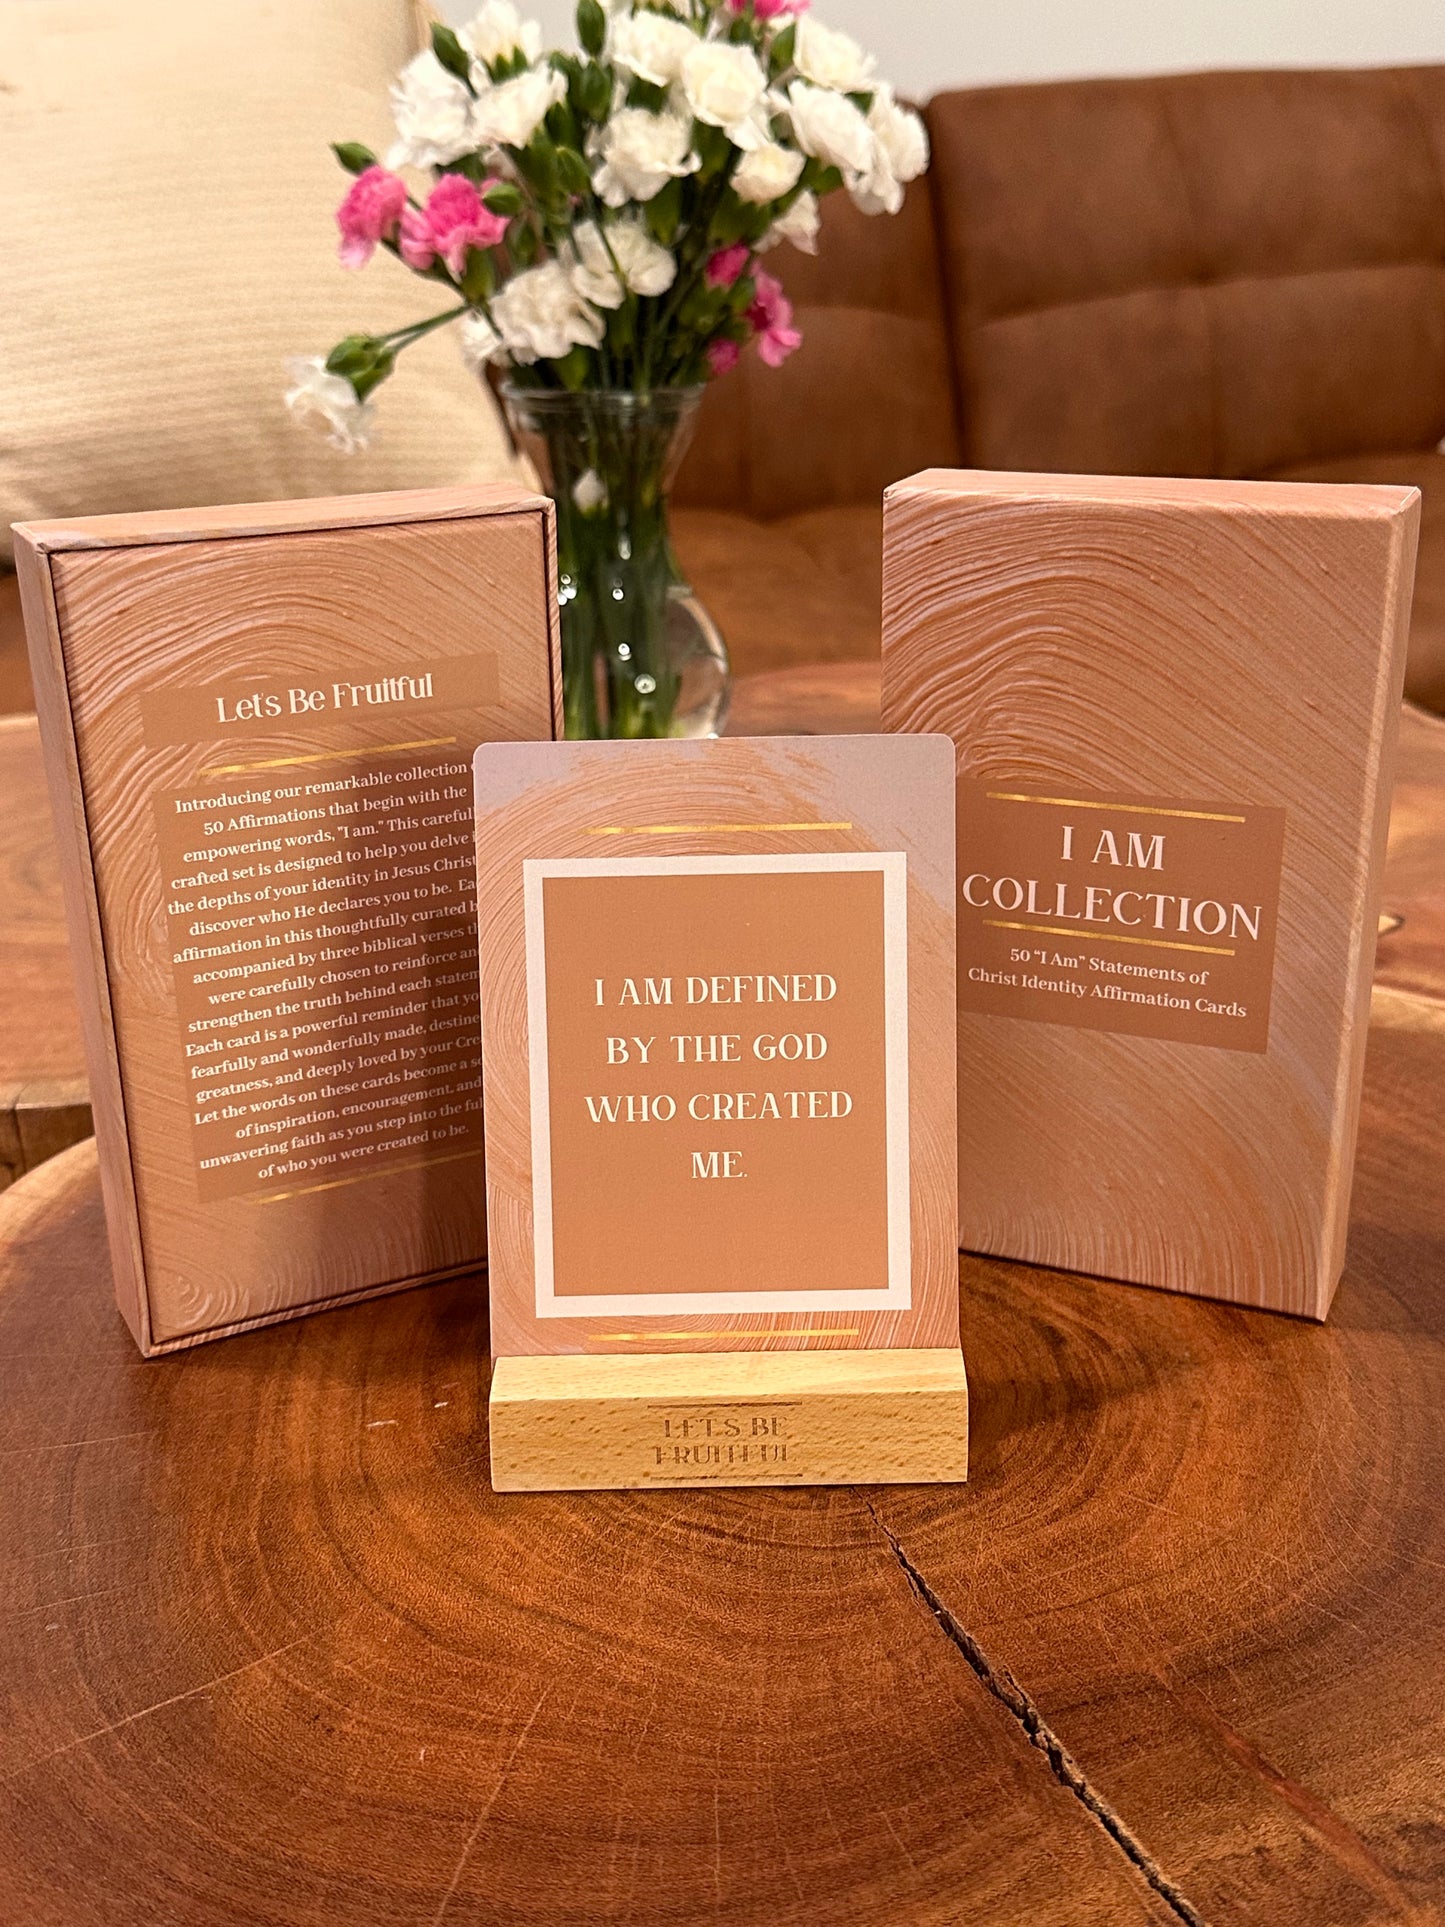 I AM Collection: Christ Identity Affirmation Cards